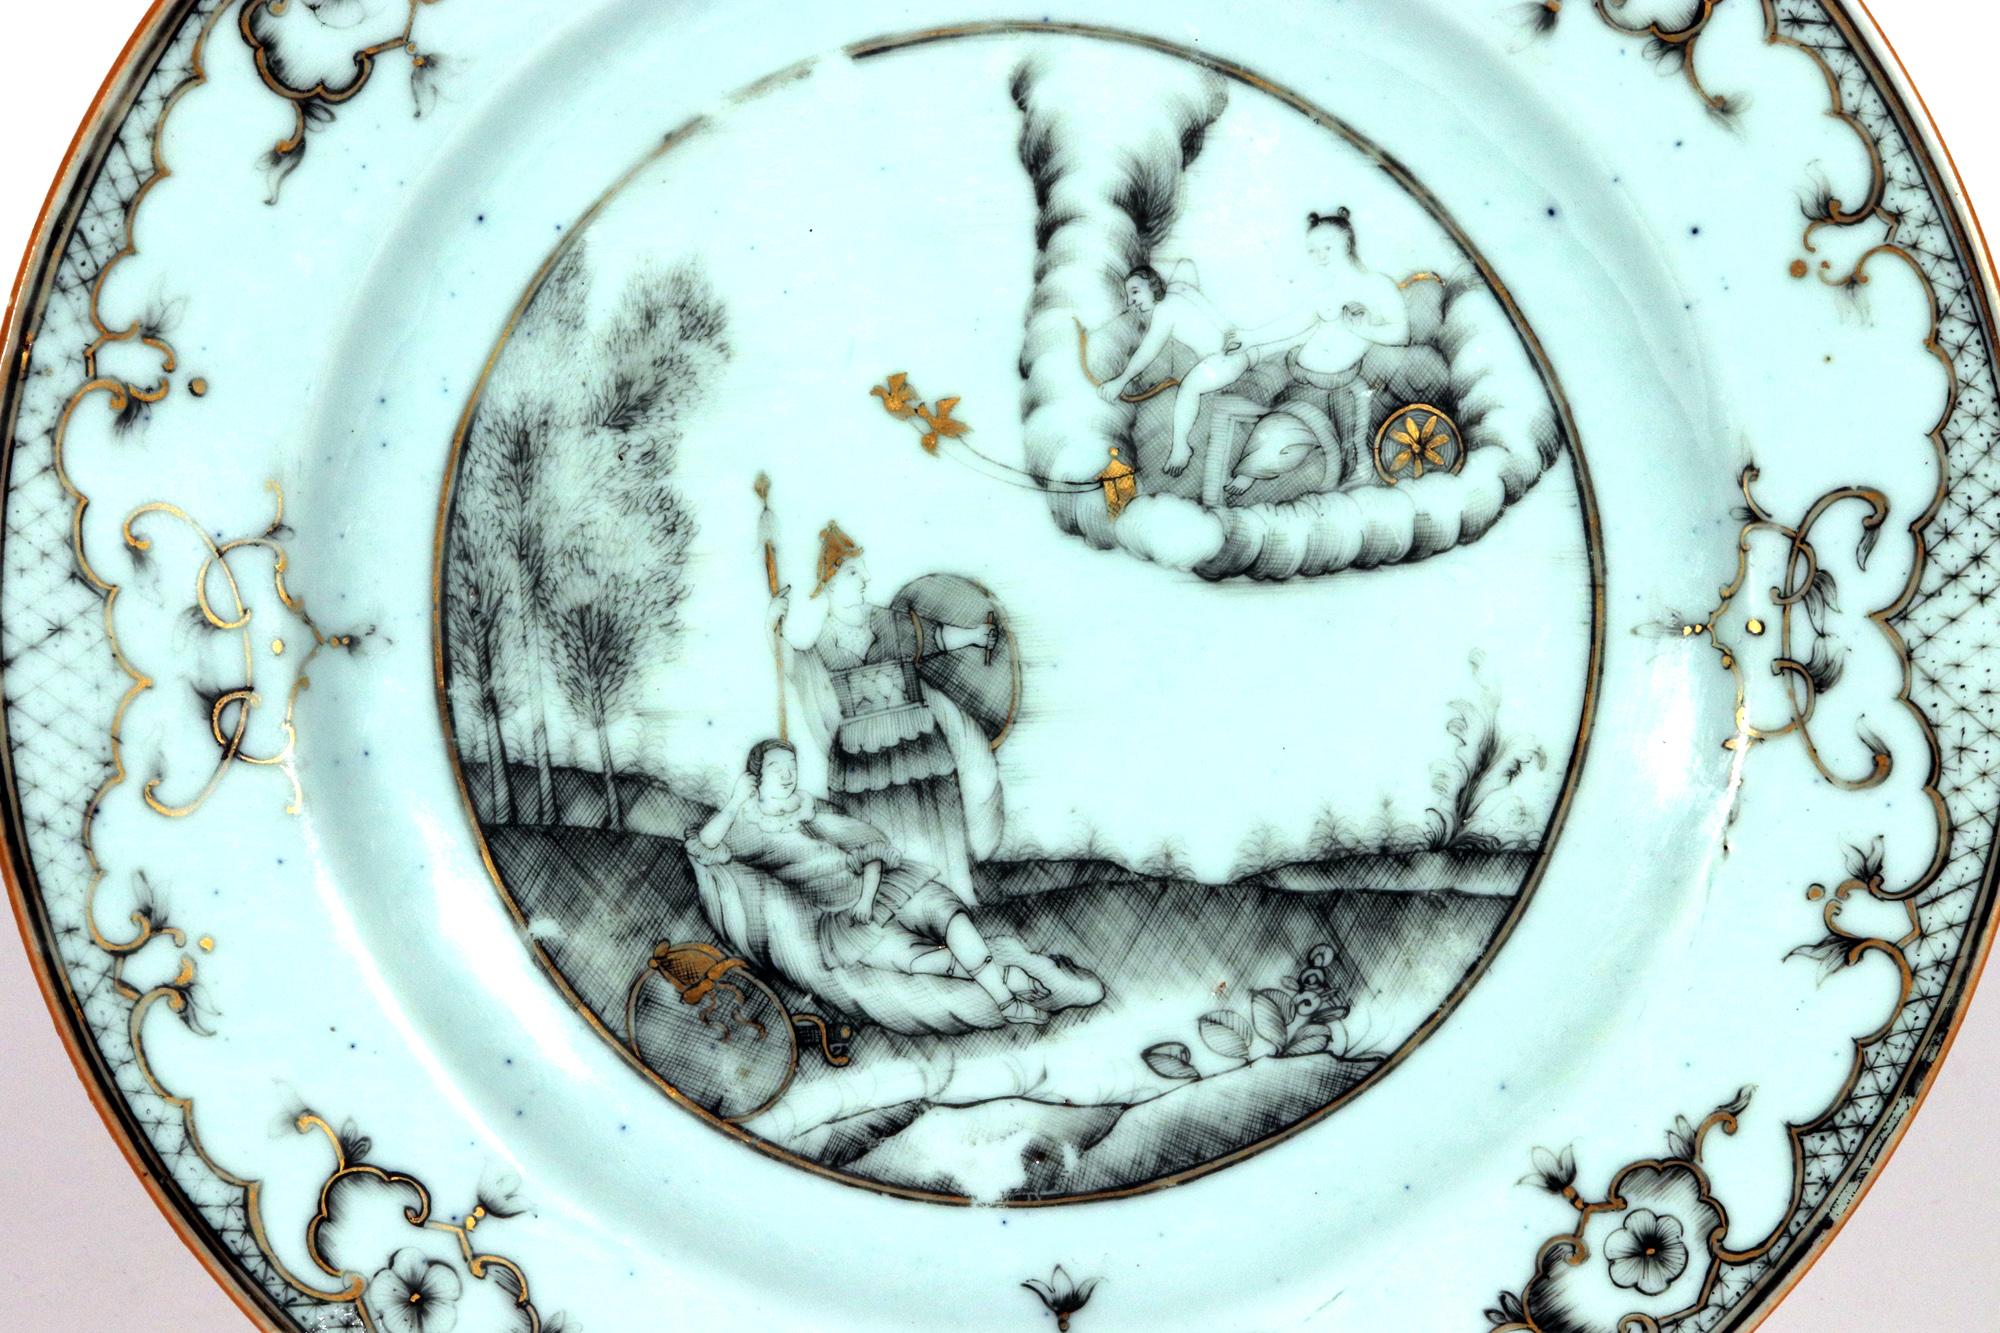 Chinese Export Porcelain En Grisaille Mythical Plate,
Venus, Cupid, Adonis and Minerva,
Circa 1745

The Chinese Export circular porcelain plate is painted en grisaille with a scene from Greek mythology.  Venus is in her chariot in a cloud above with